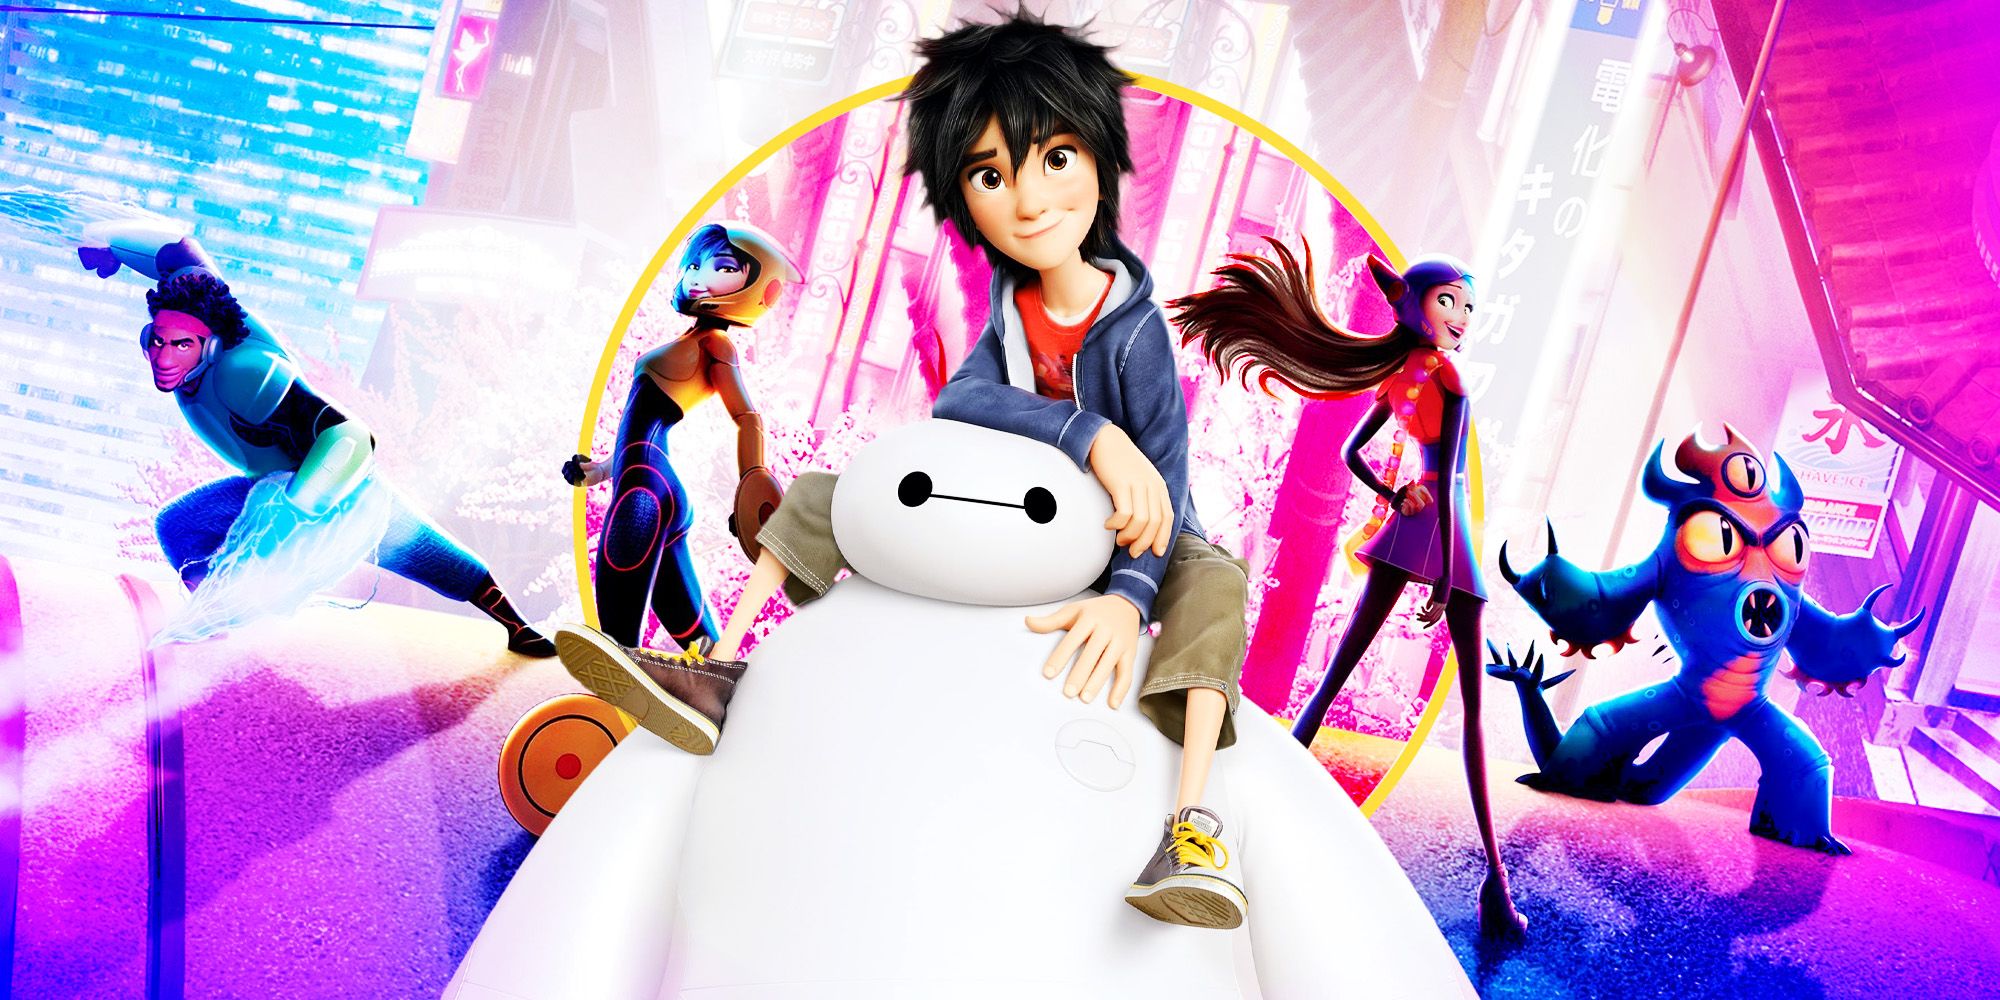 Hiro and Baymax with the other super characters from Big Hero 6